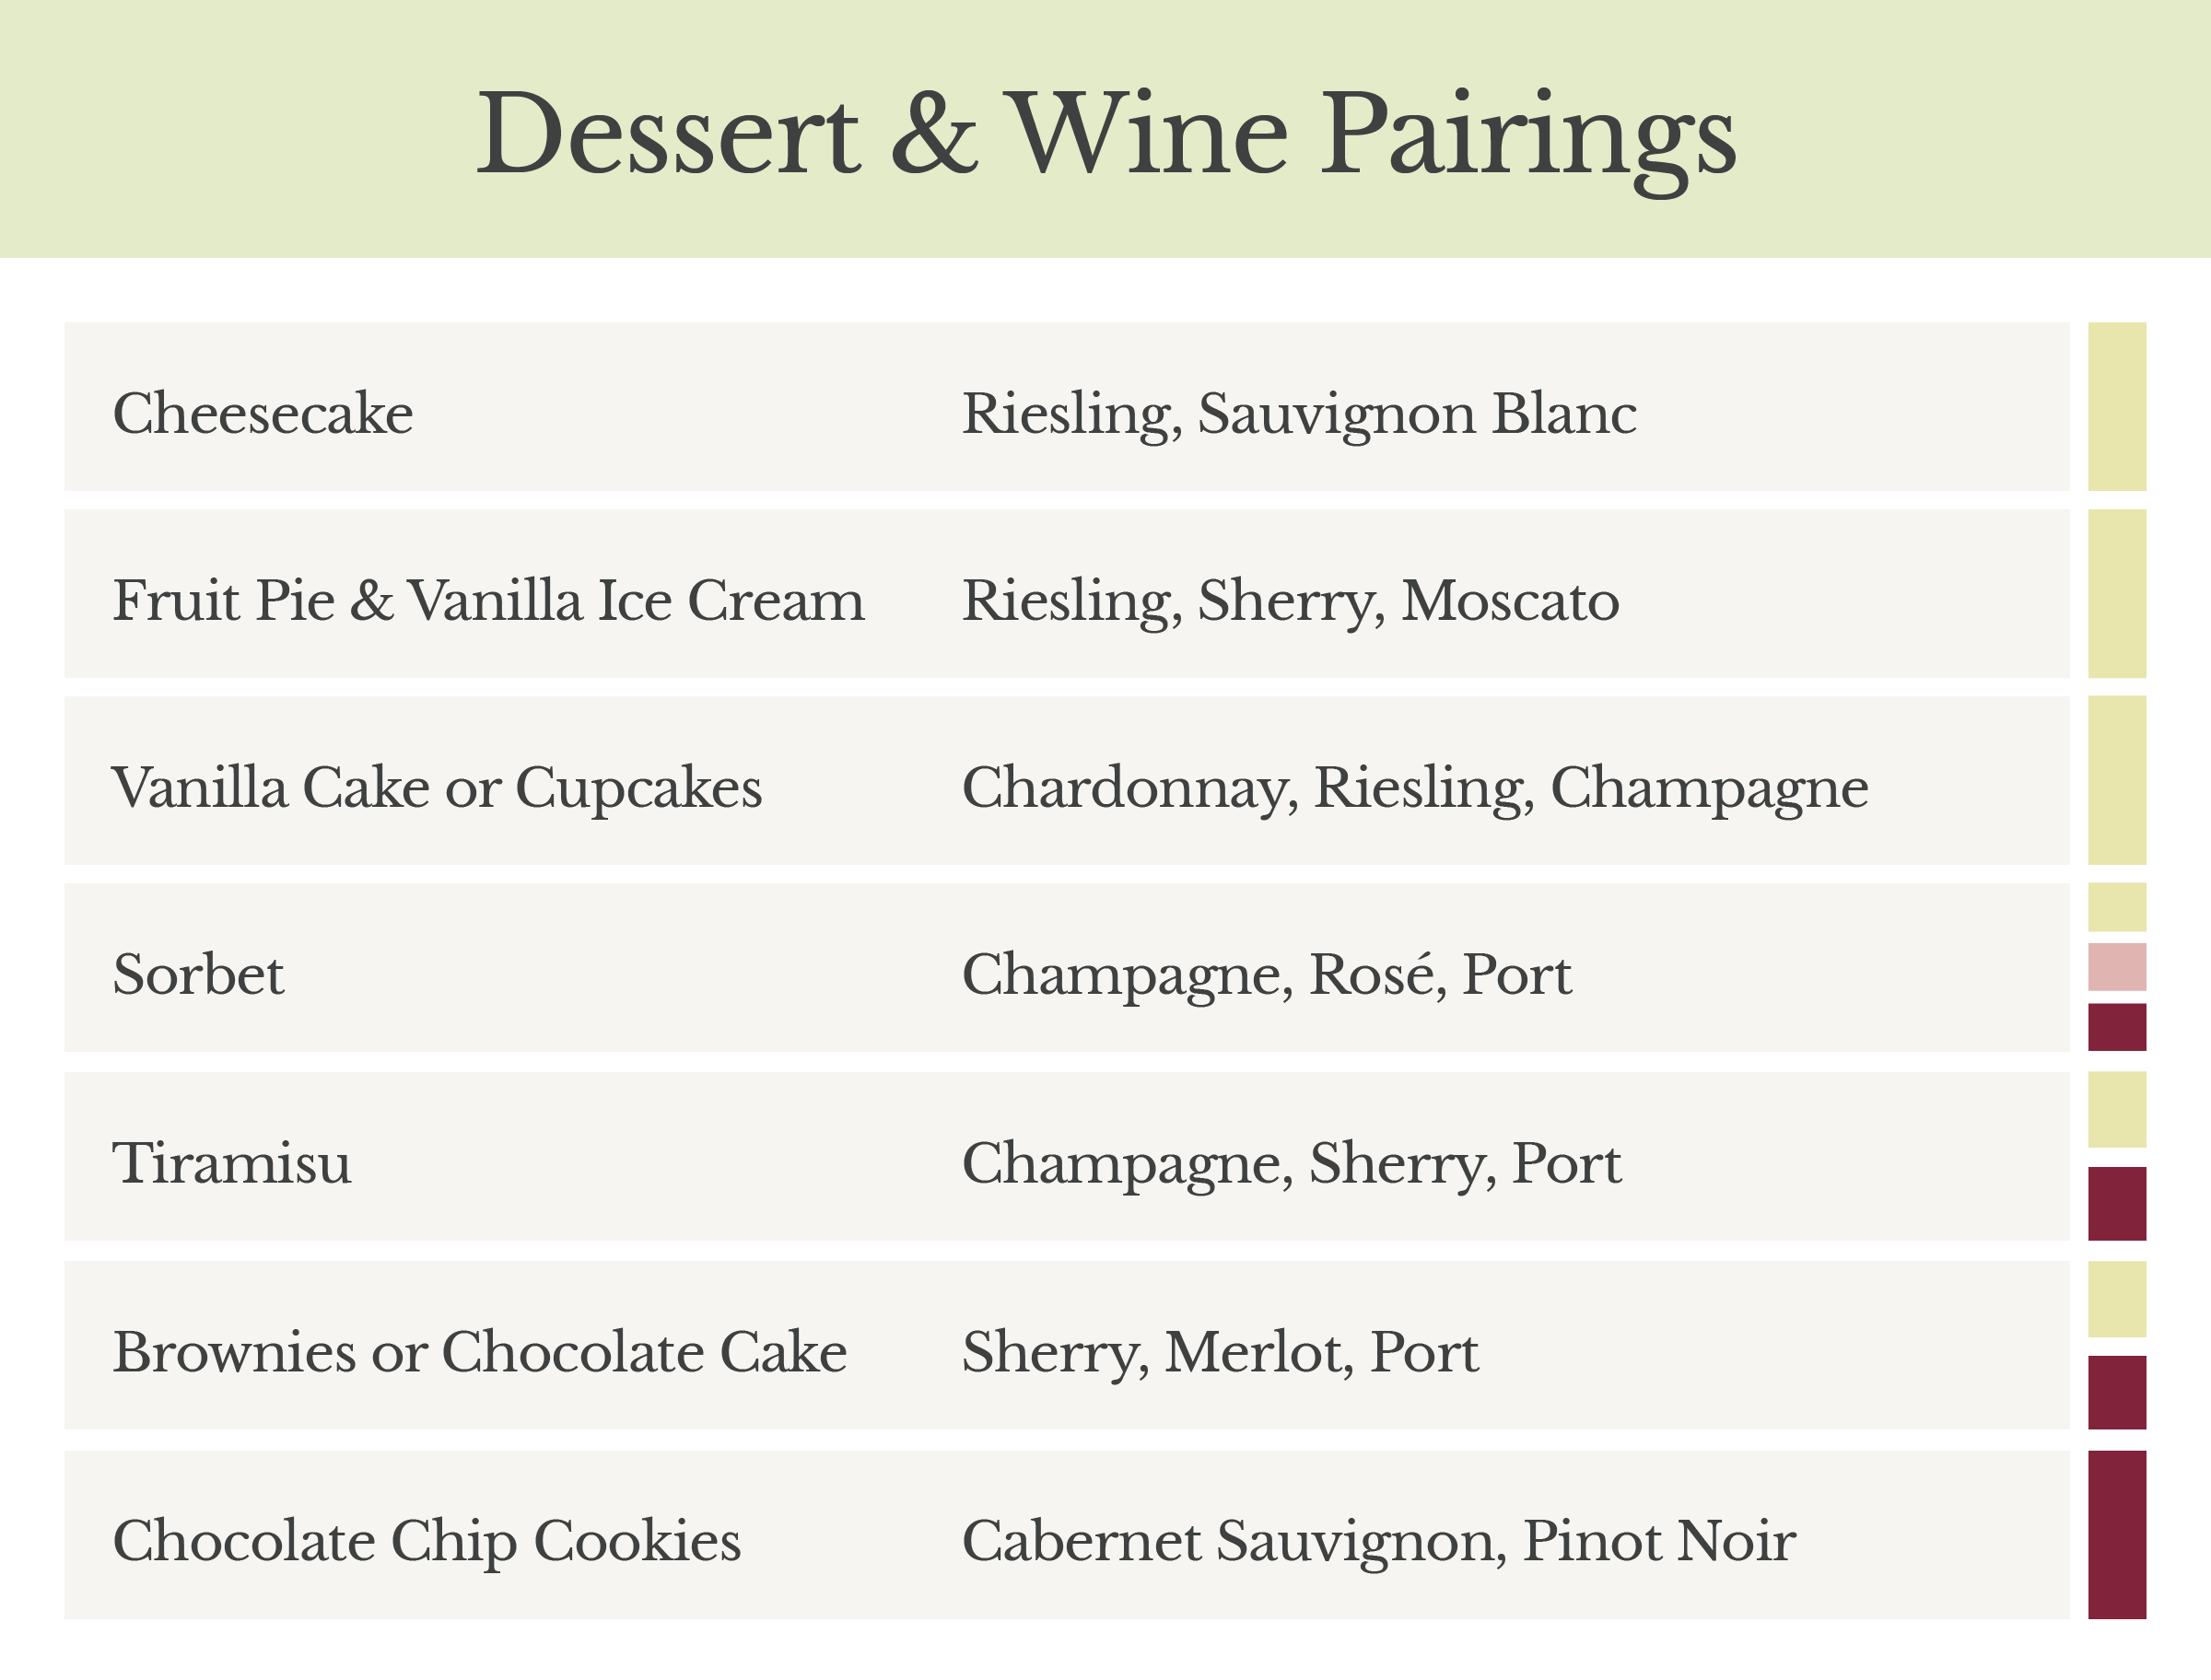 Chart showing popular dessert and wine pairings.